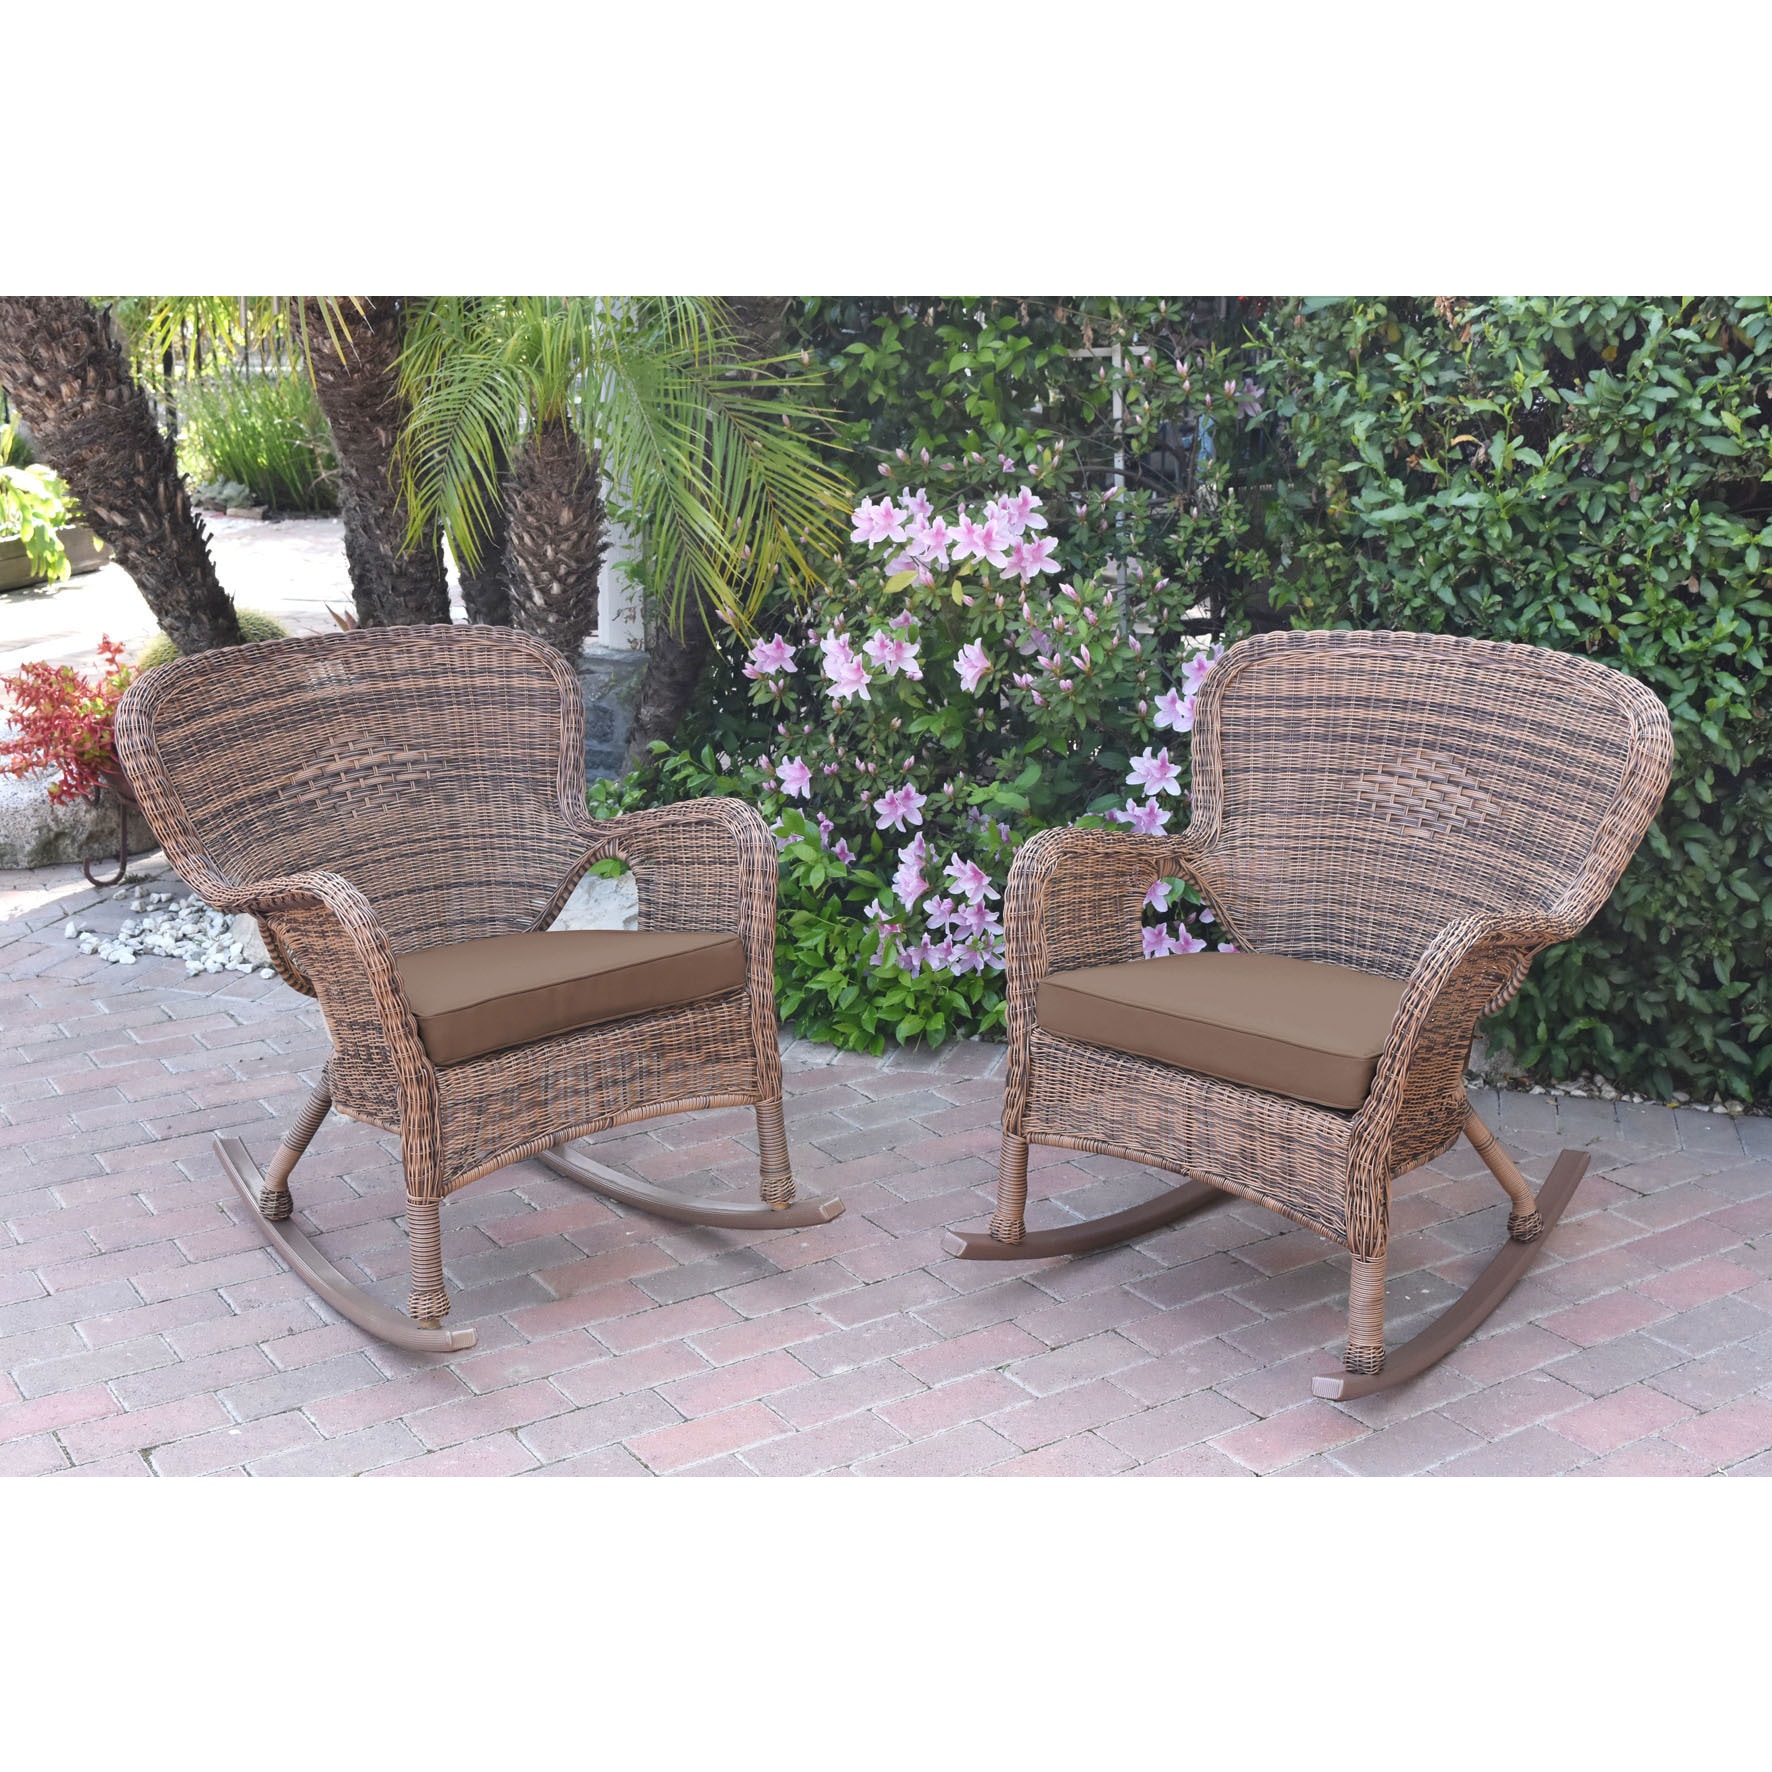 Jeco Windsor Honey Resin Wicker Rocker Chair With Cushions (set Of 2)